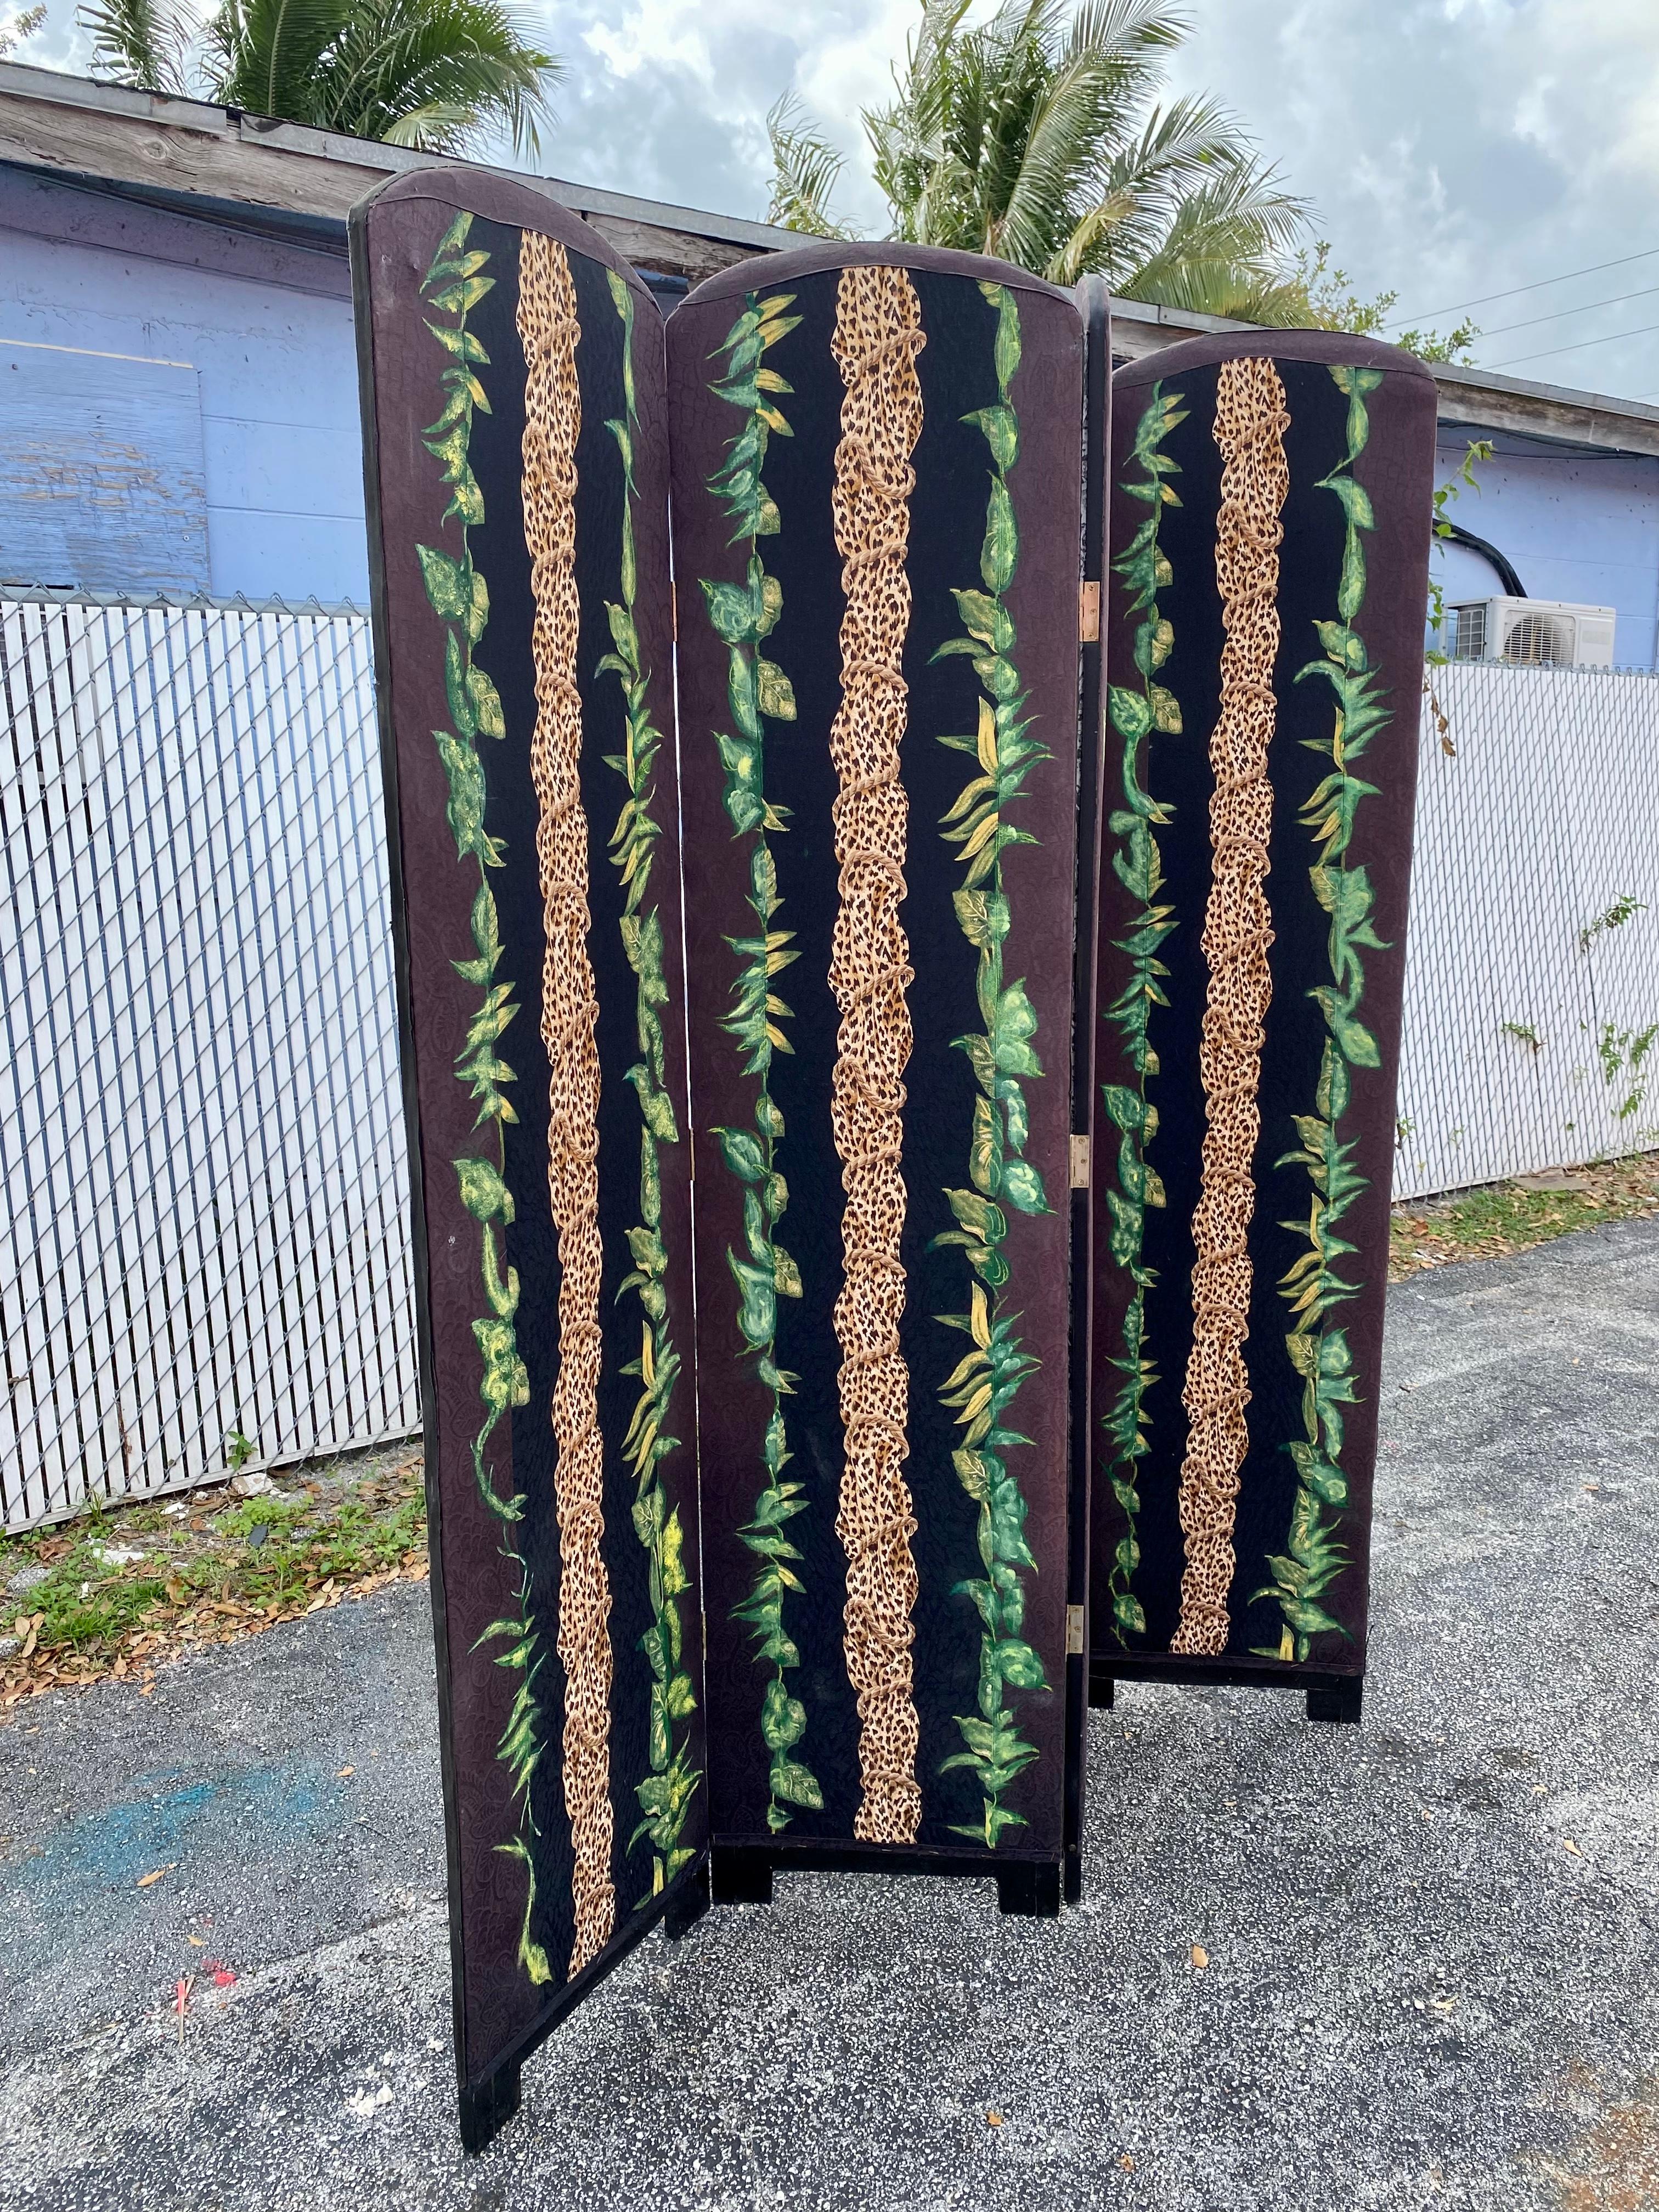 On offer on this occasion is one of the most stunning, hand painted upholstered safari panels and room divider you could hope to find. Outstanding design is exhibited throughout. Just look at the gorgeous details on this beauty! The hand painted